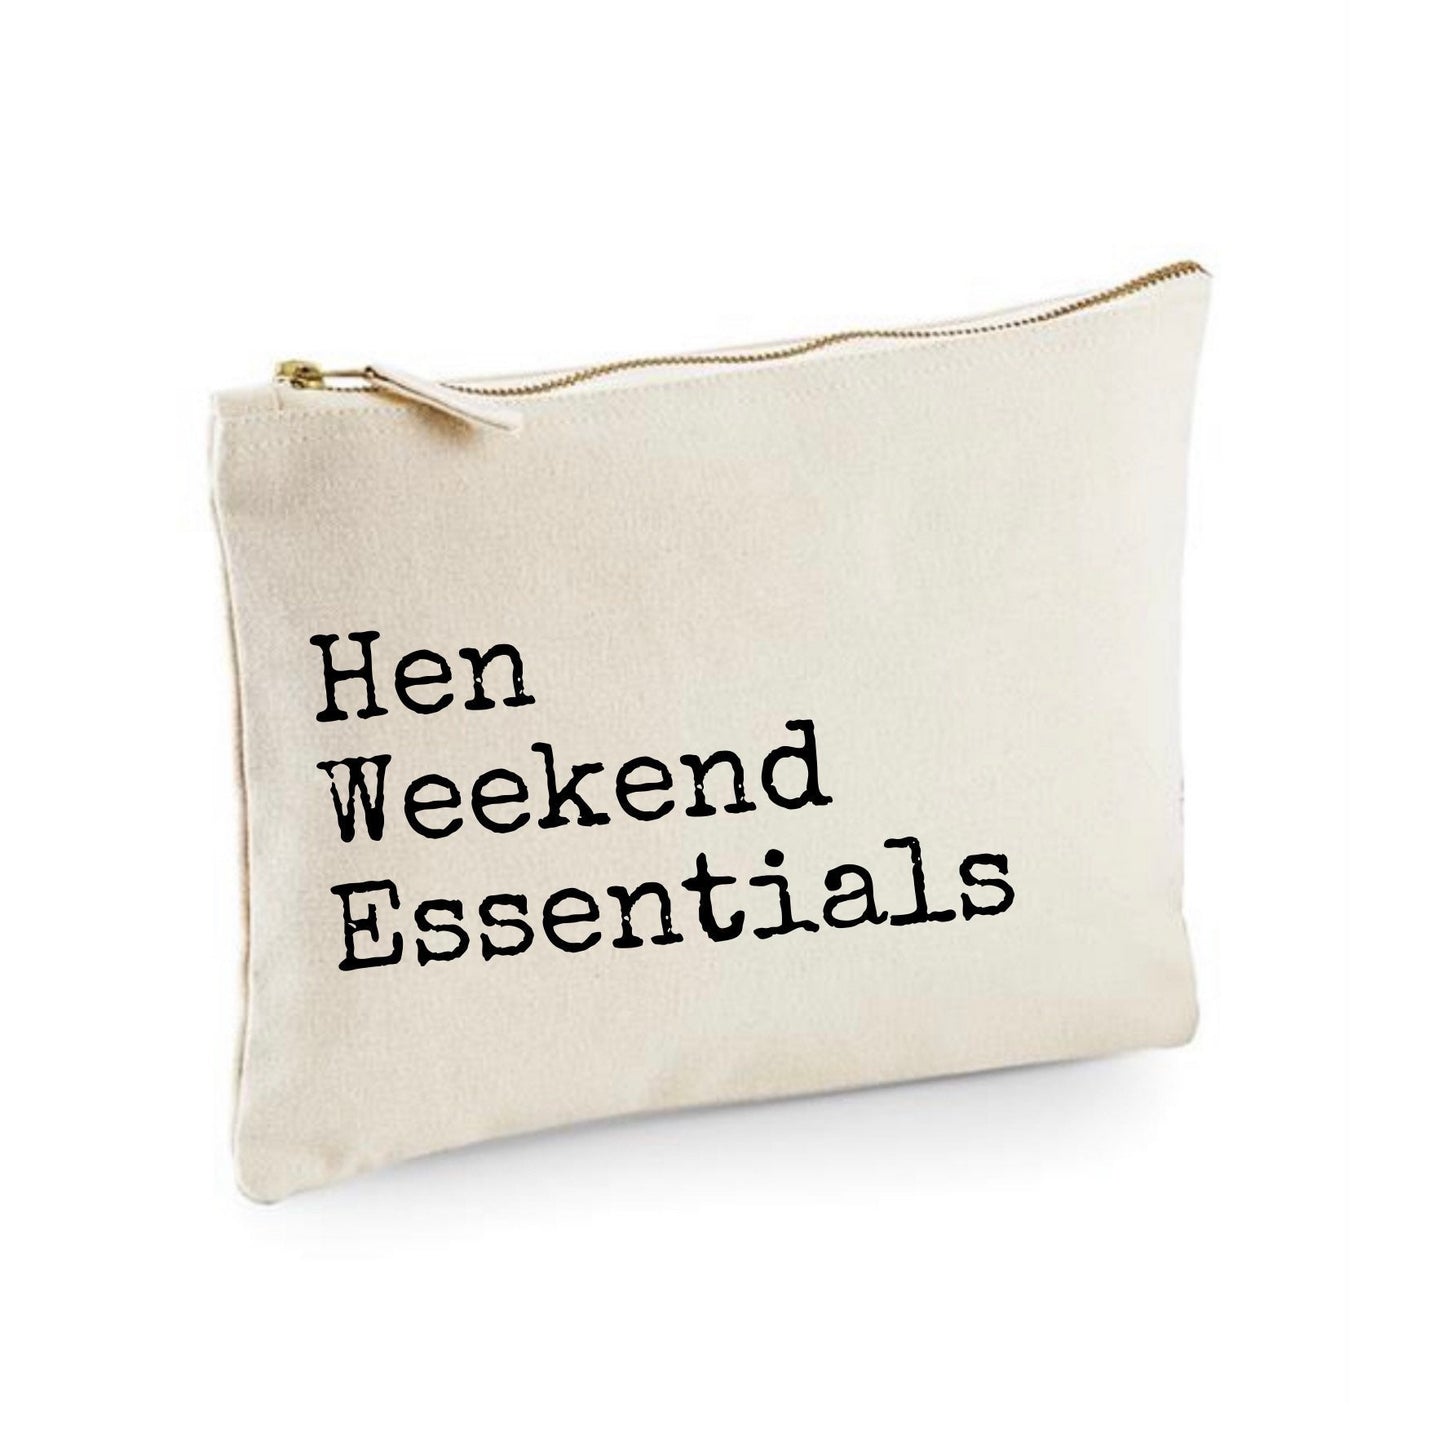 Hen Weekend Essentials bag, girls weekend holiday travel pouch, bachelorette weekend bag, hens holiday cotton cosmetic, toiletry bag